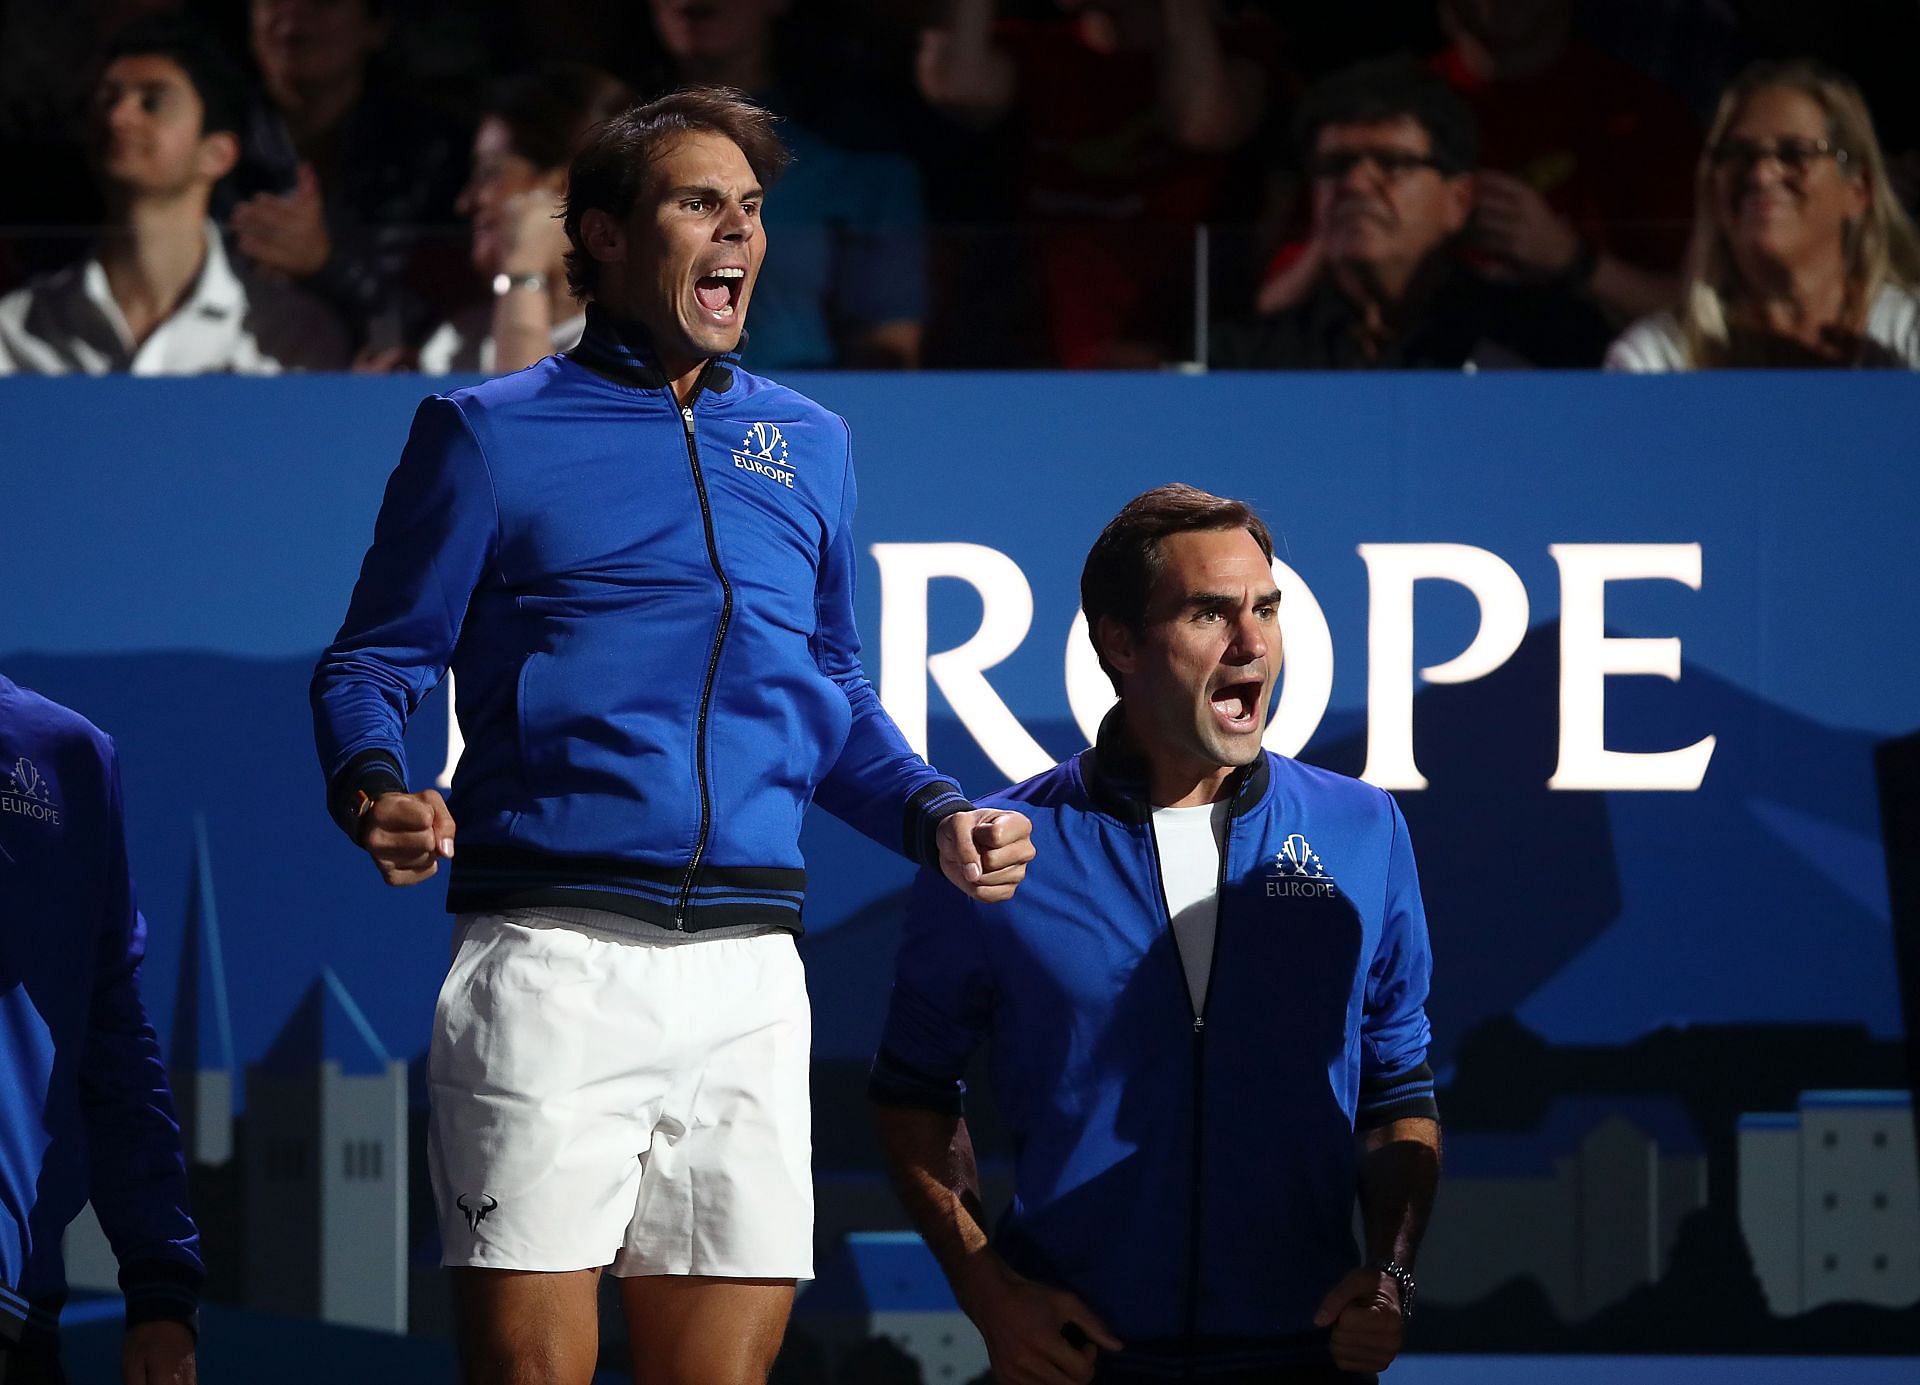 The team Europe line-up includes Rafael Nadal, Roger Federer, Novak Djokovic and Andy Murray